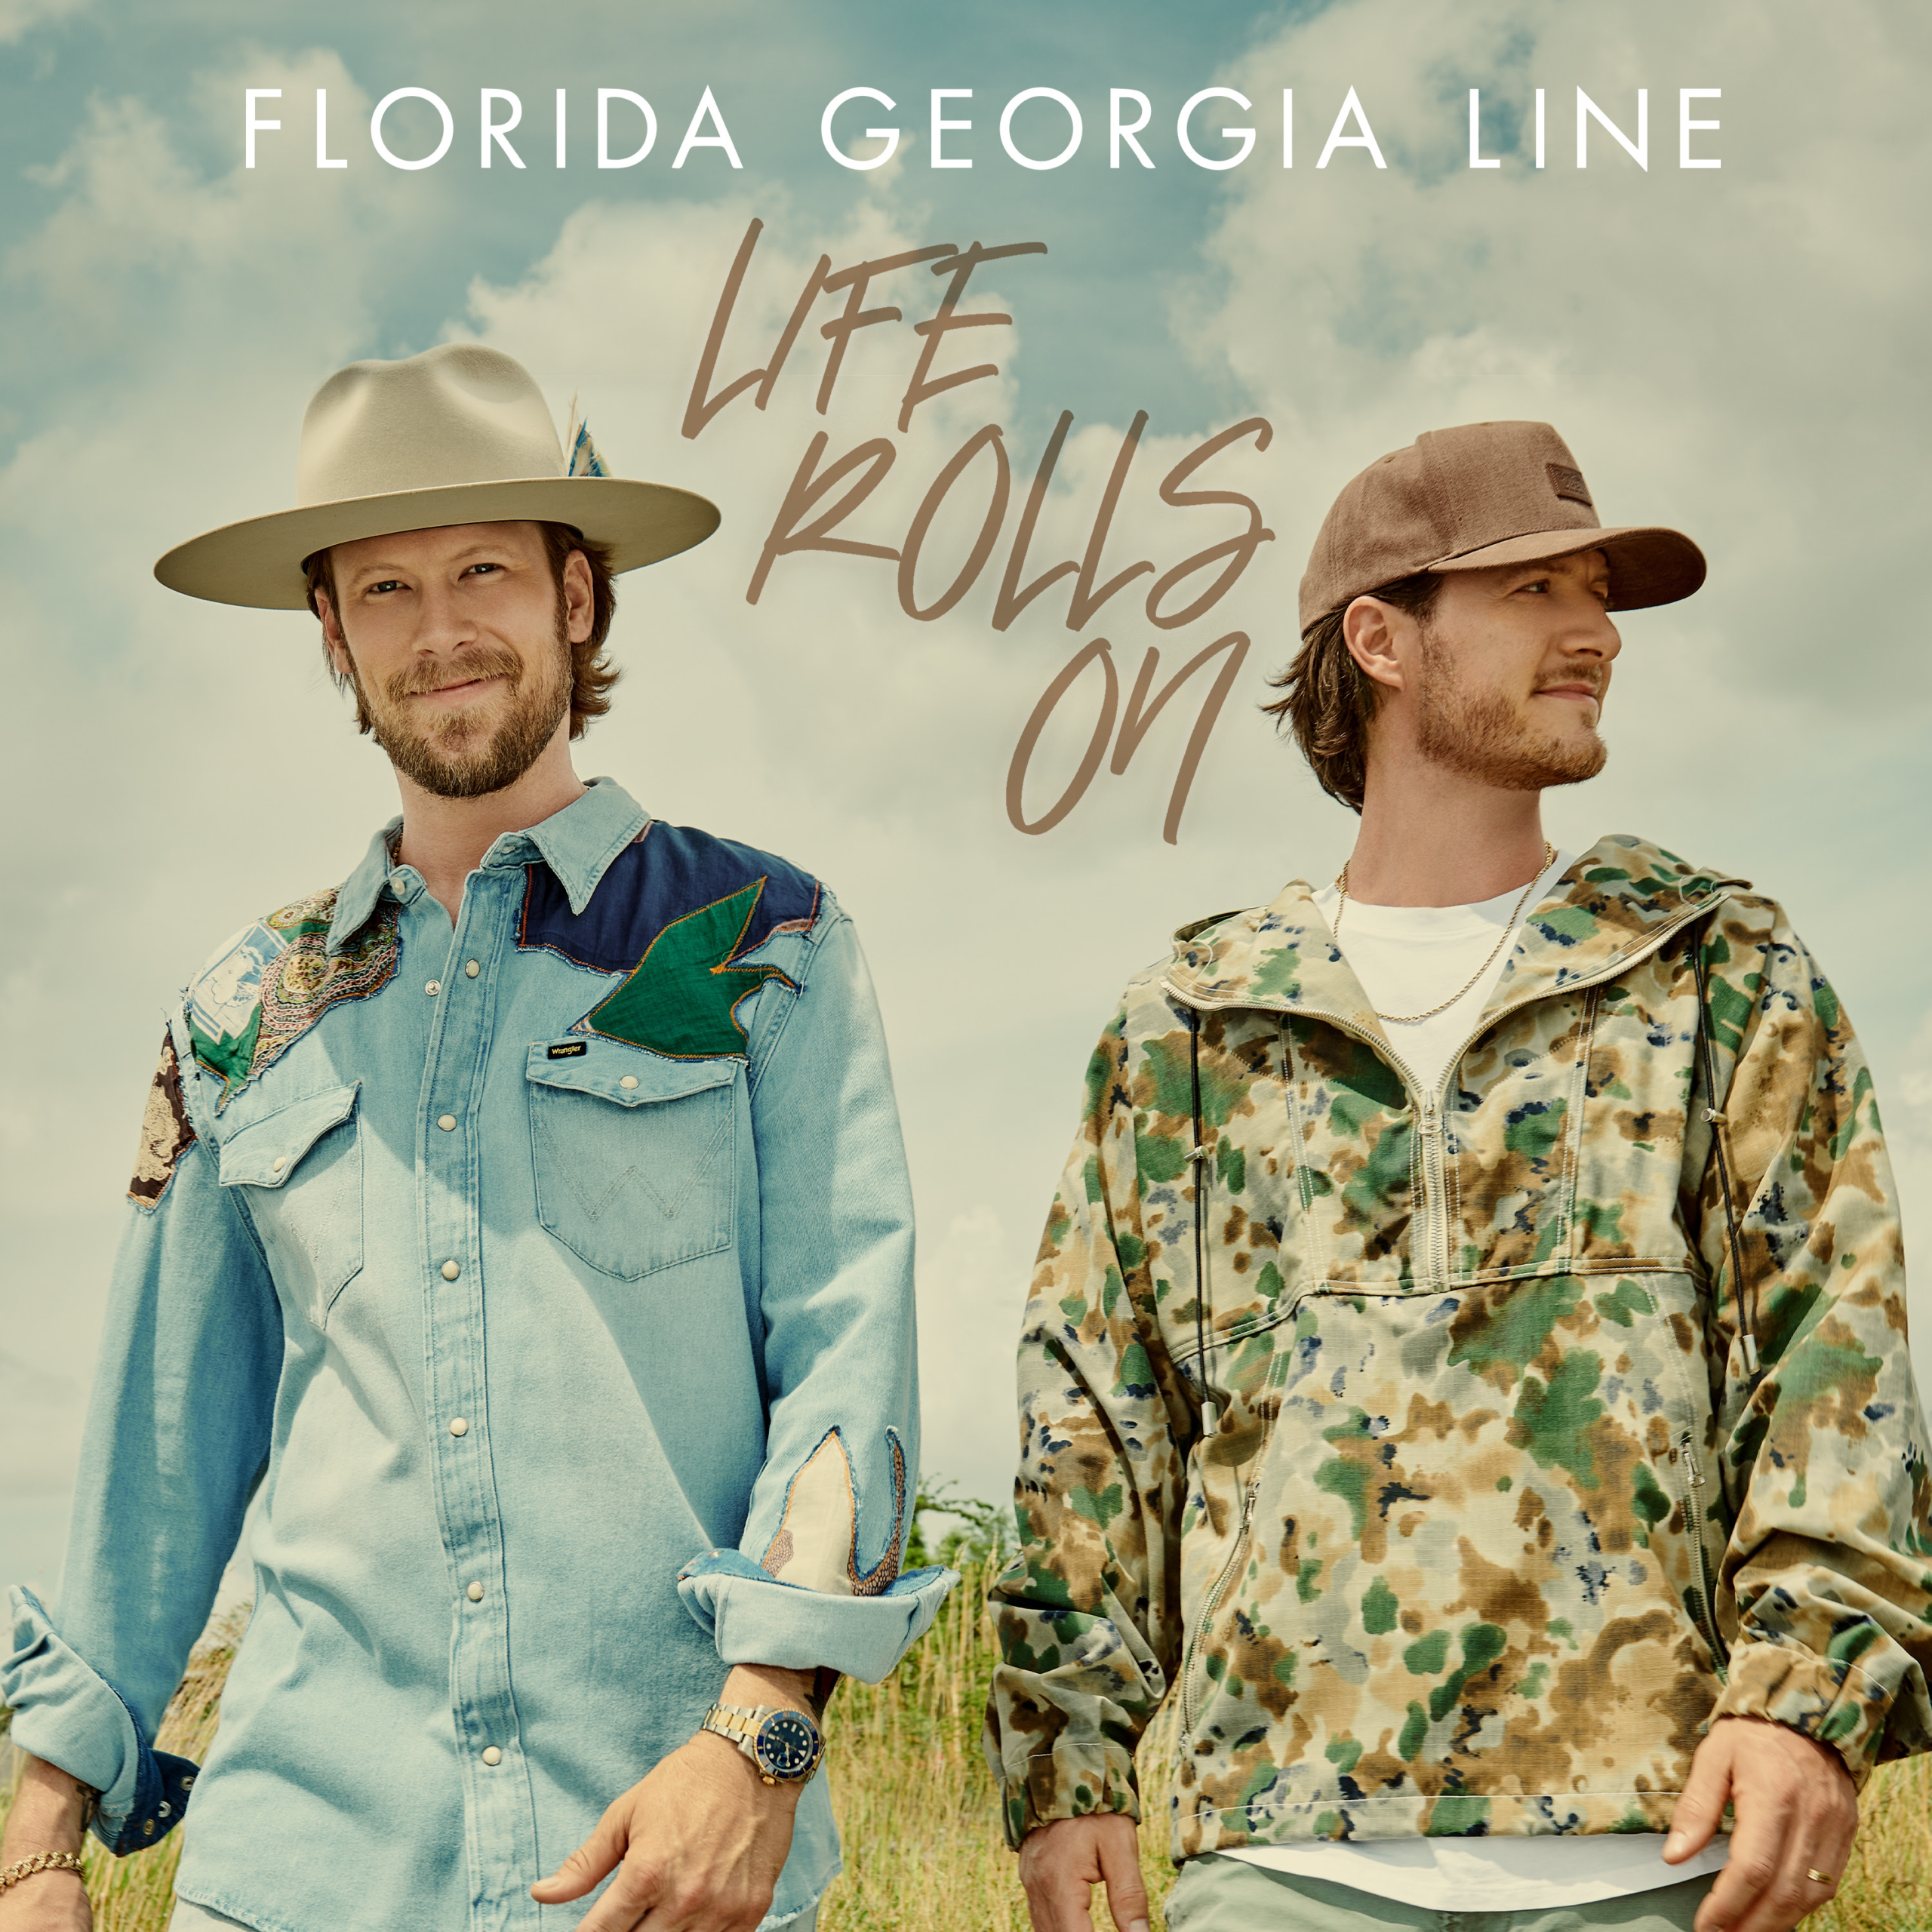 Florida Georgia Line's new album 'Life Rolls On' is available everywhere now, February 12th